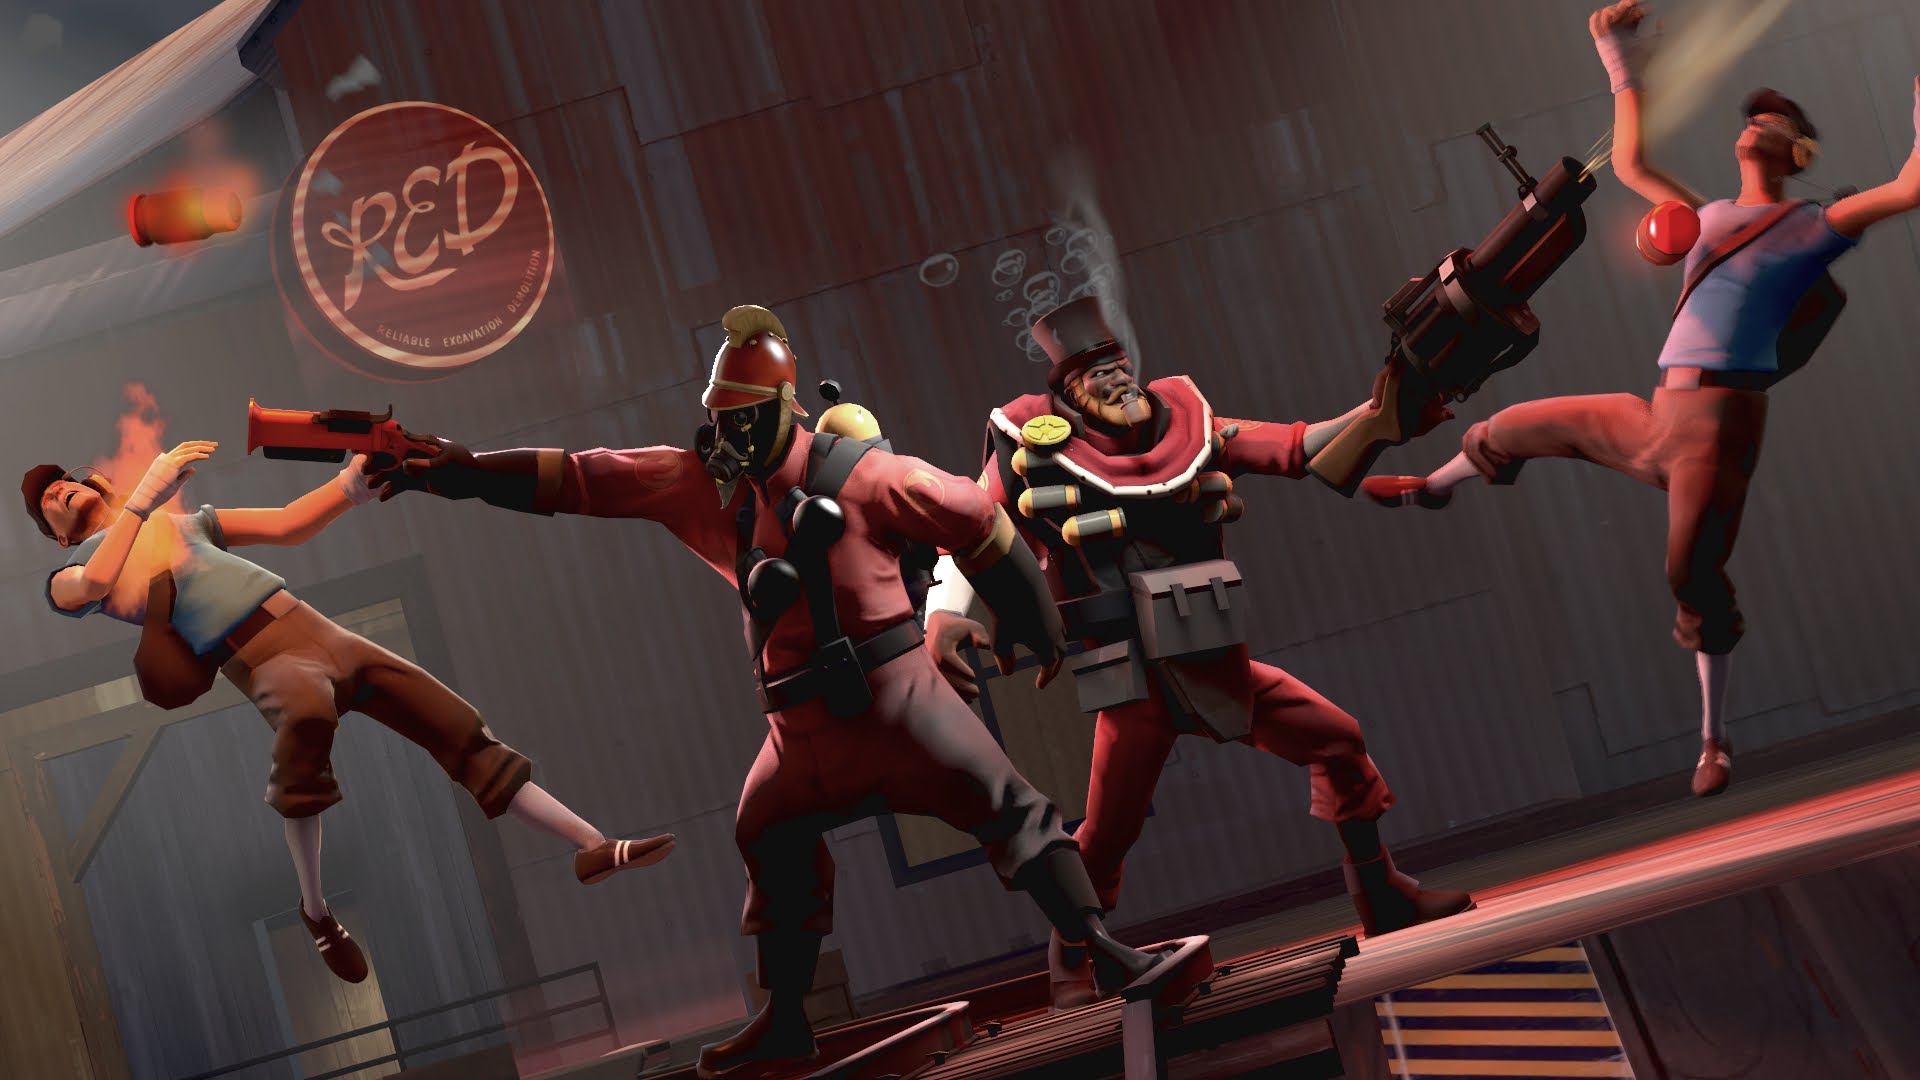 Pack Wallpapers HD de Team Fortress 2TF2 - YouTube